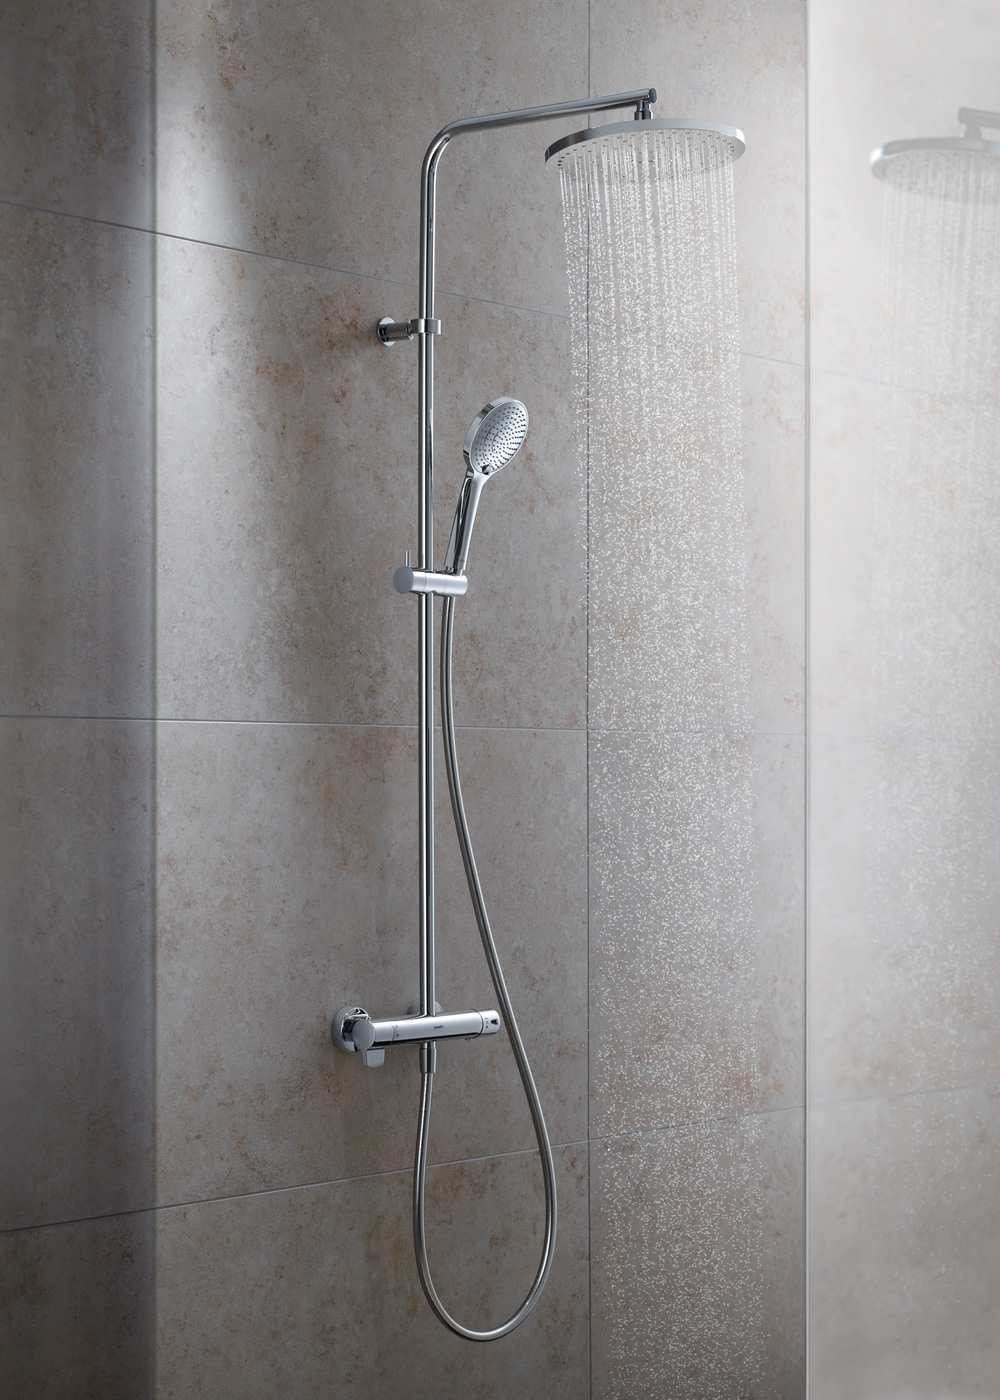 Shower system in chrome with running water

